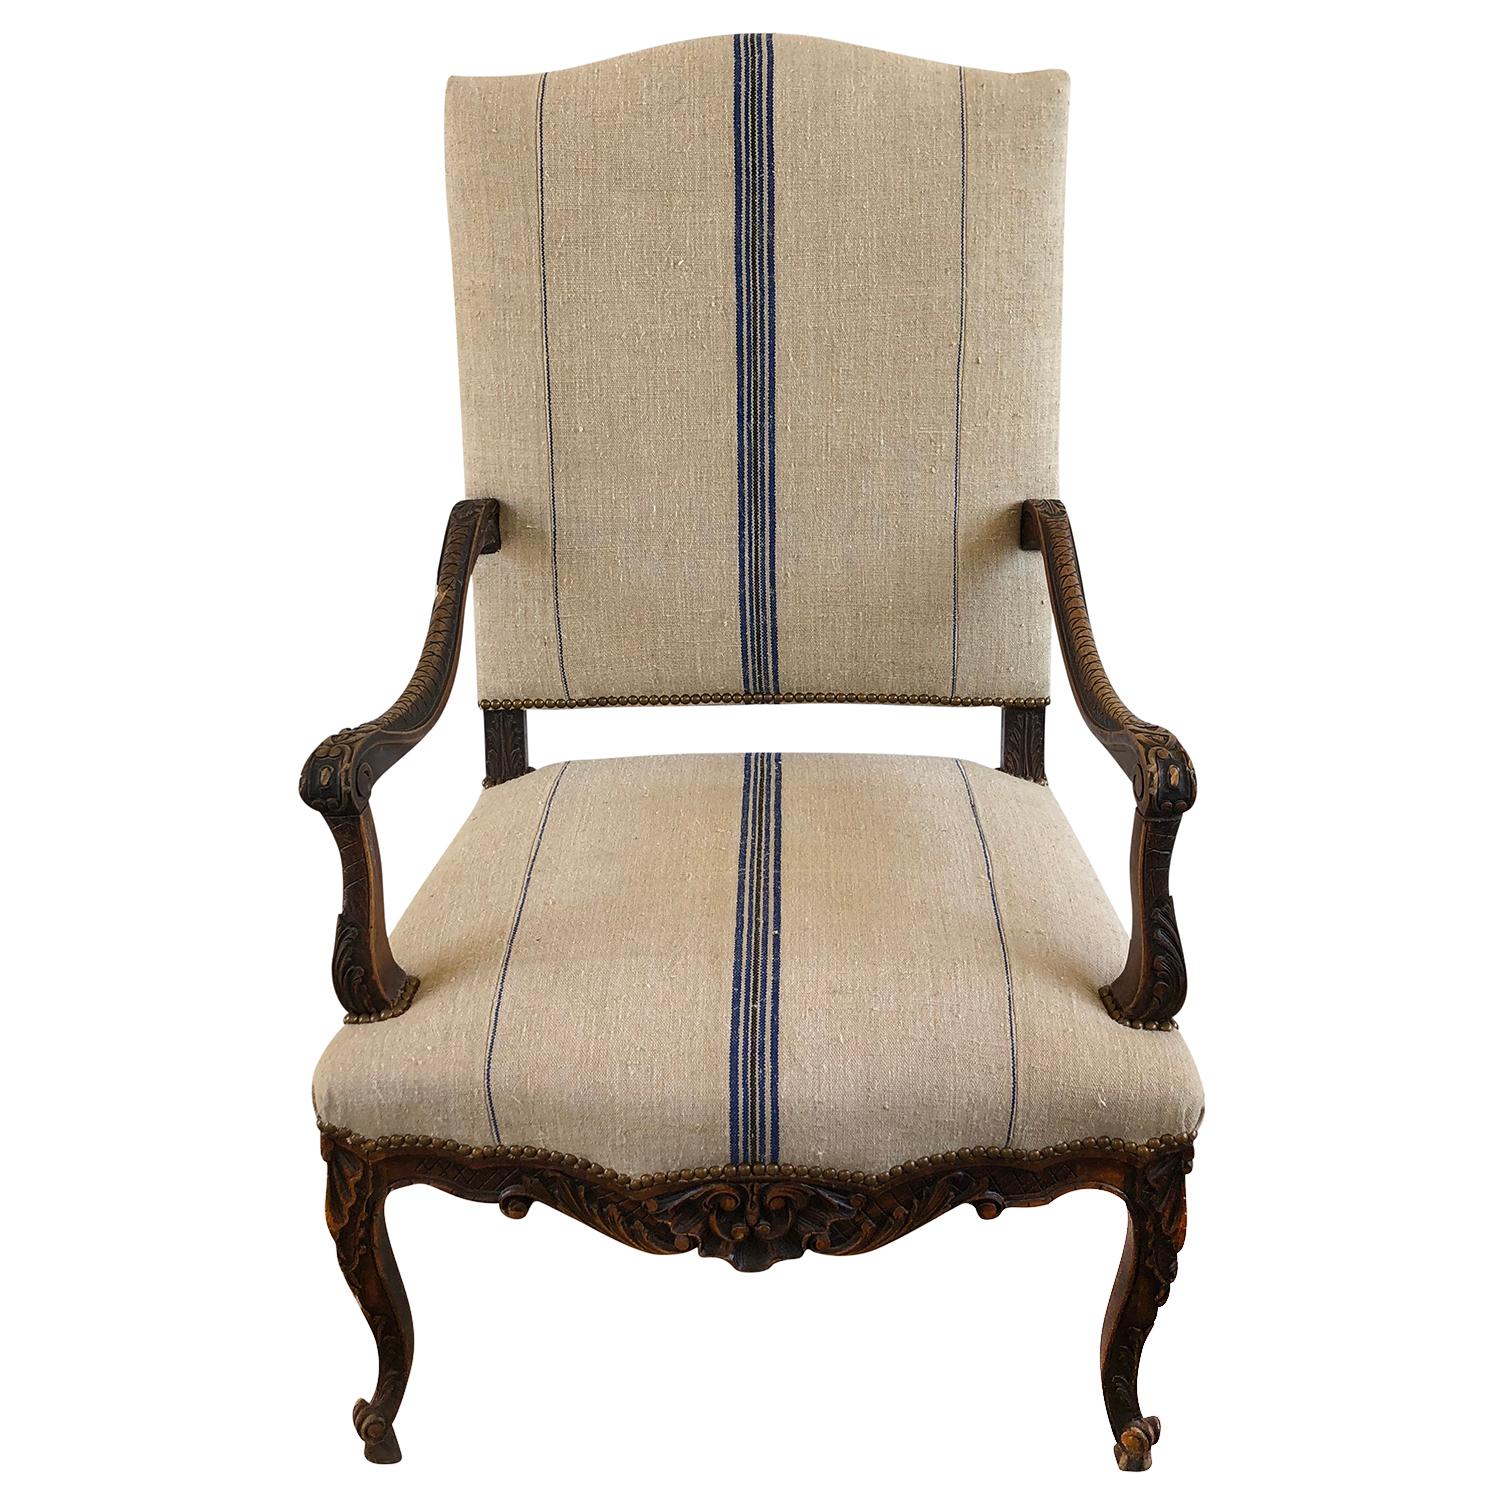 An antique French armchair from Bourgogne, France. A hand crafted Beechwood frame and brass detailing in good condition. Centered blue and black striped hemp fabric and matching small pillow. Wear consistent with age and use, circa 18th century,